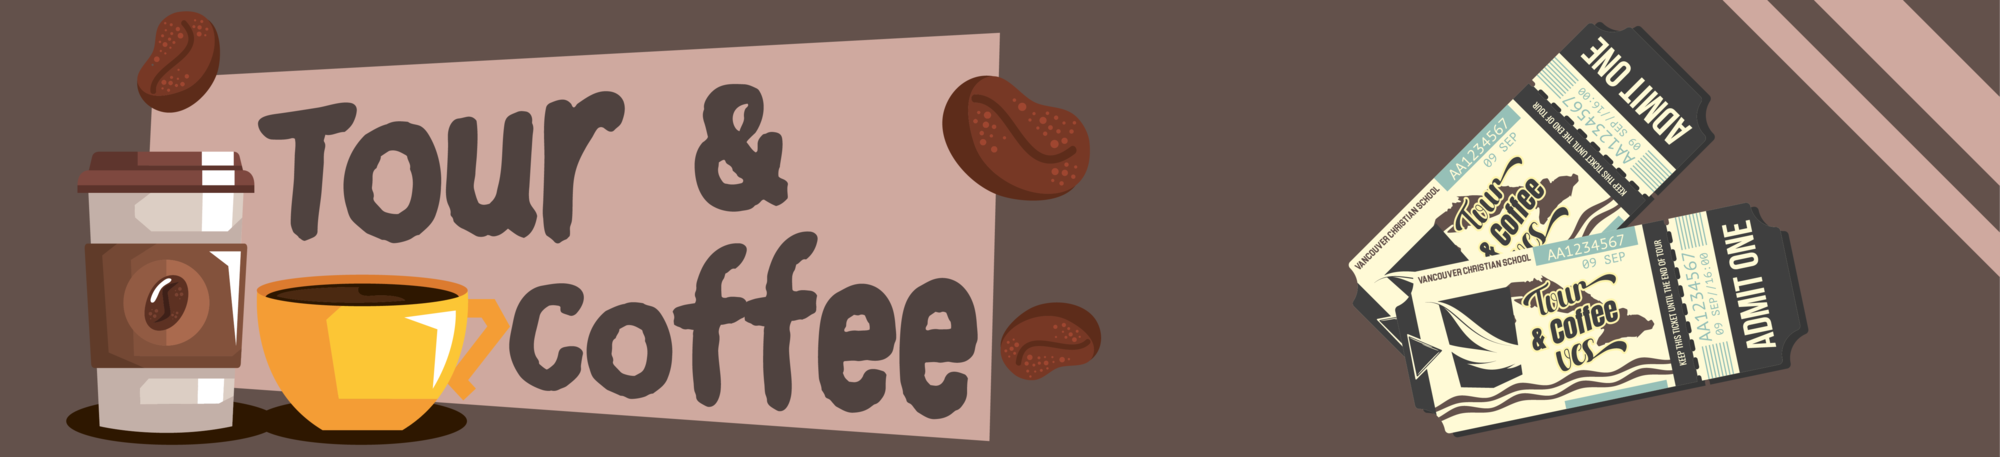 Banner with Tour and Coffee Text. Image of coffee cup and beans